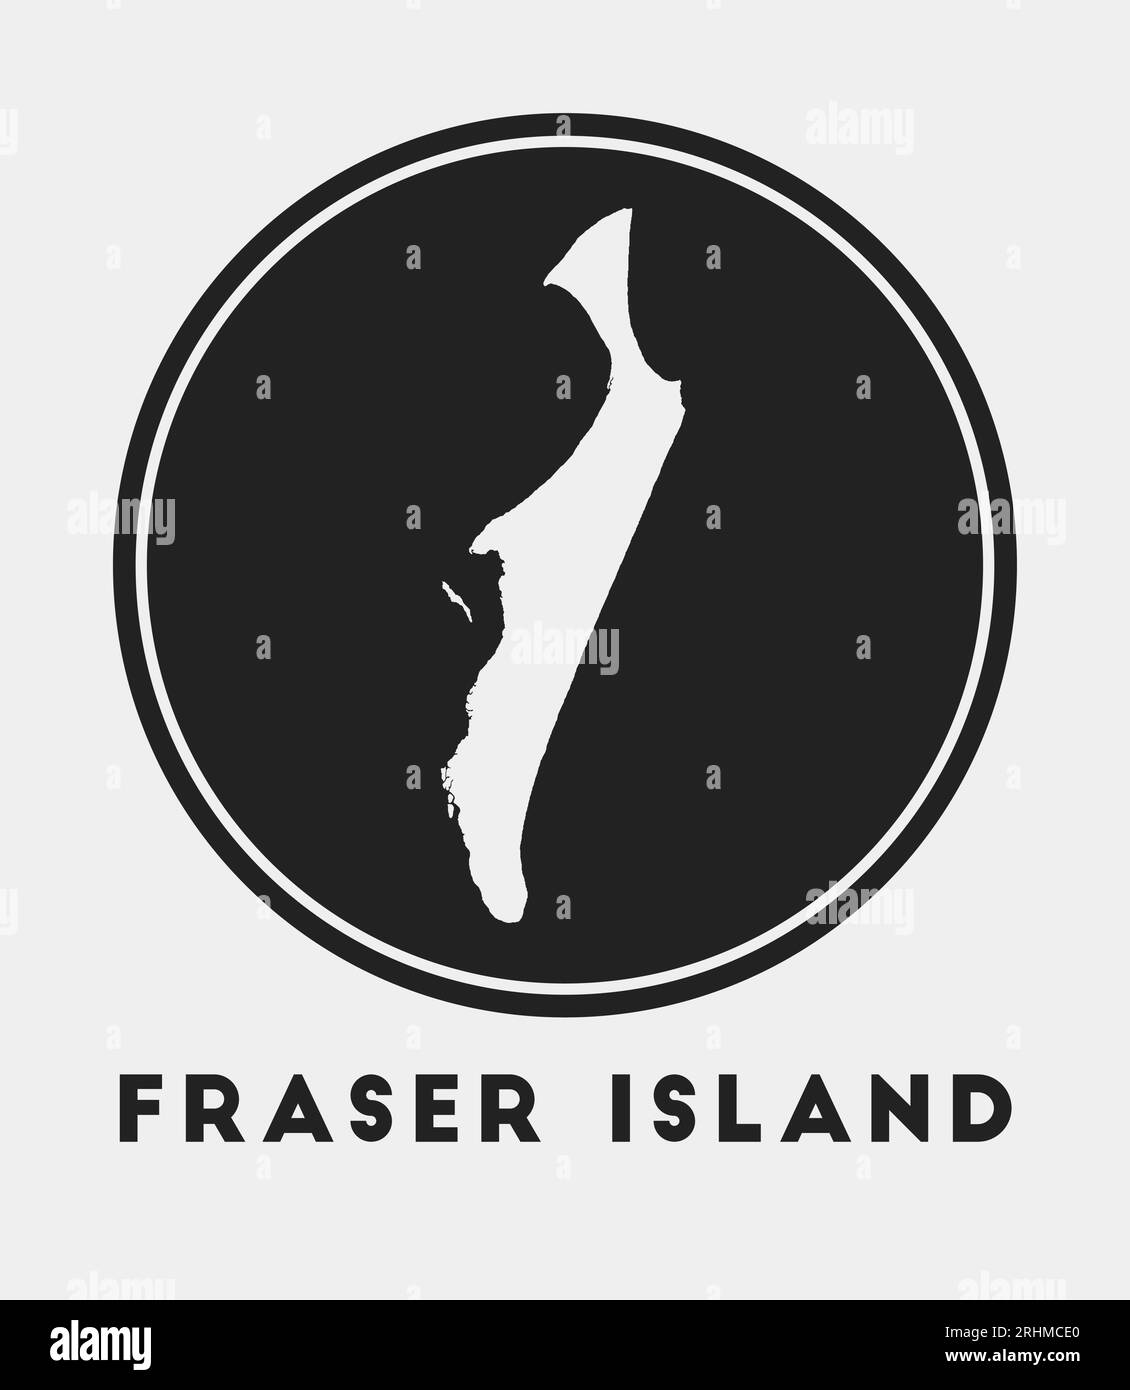 Fraser Island icon. Round logo with map and title. Stylish Fraser Island badge with map. Vector illustration. Stock Vector